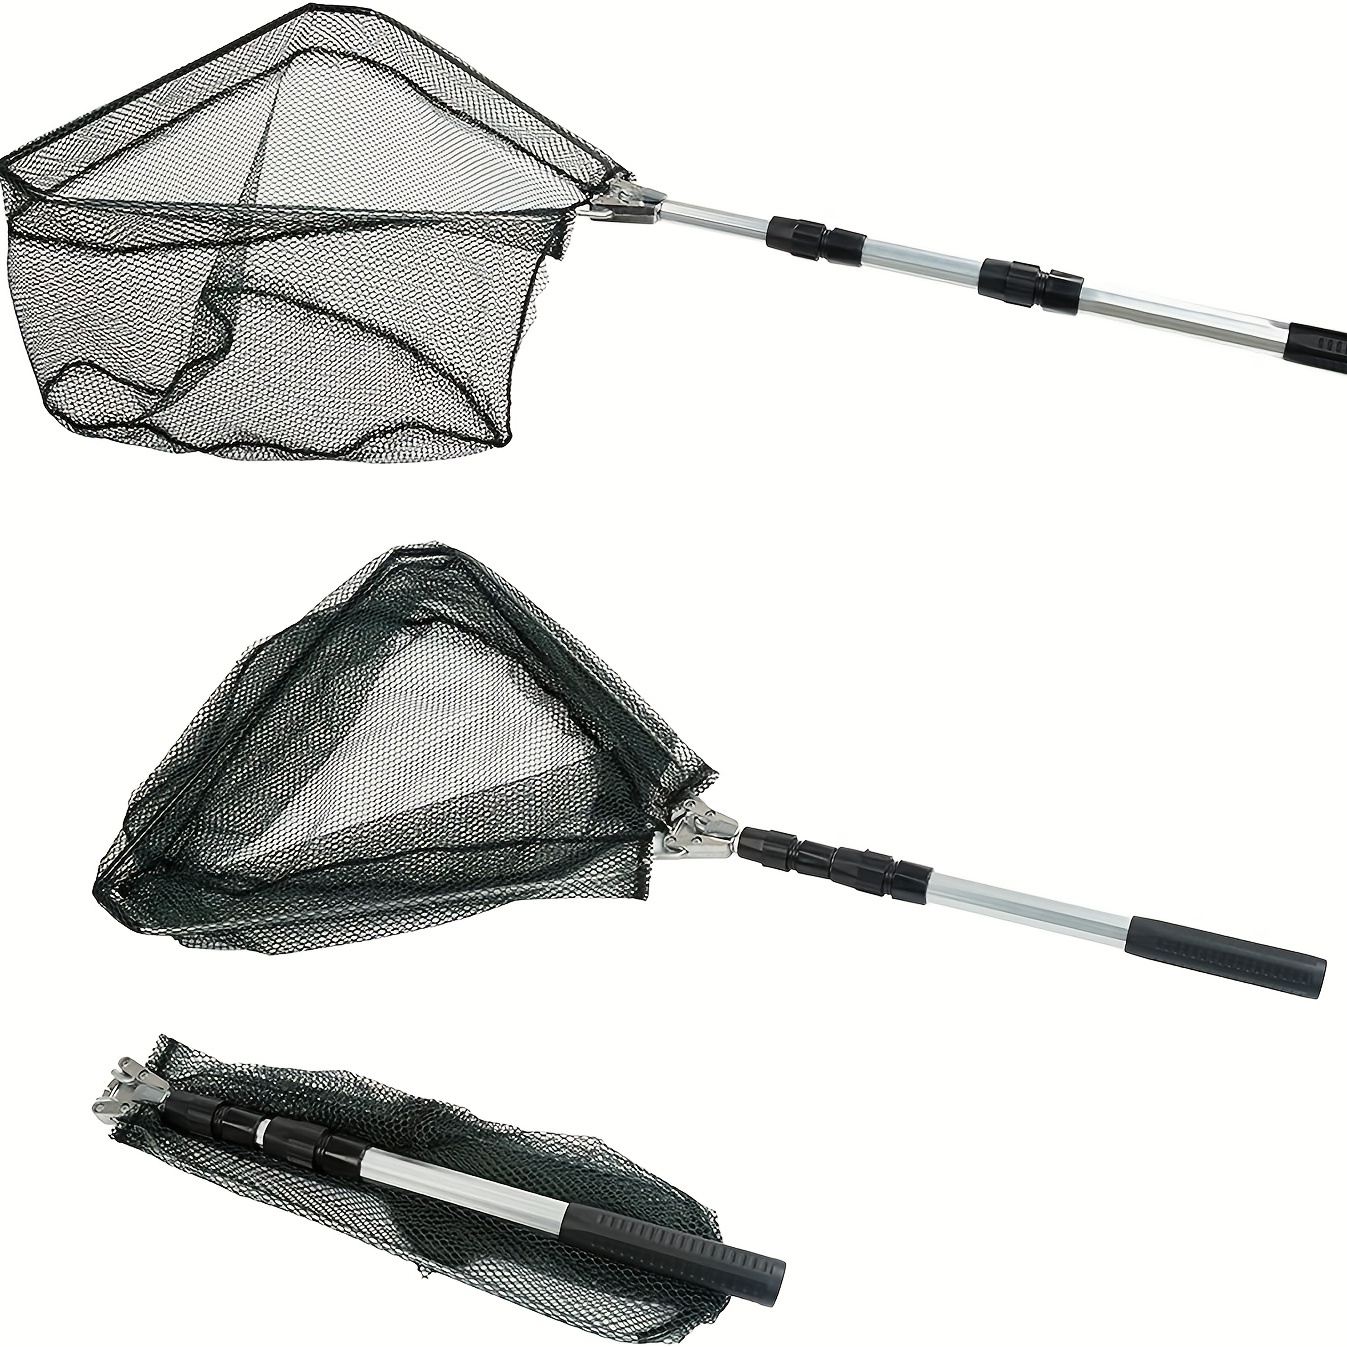 1 Set Portable Fishing Landing Net With Telescoping Pole Handle, Durable  Fishing Net For Freshwater, Extend To 2.6-6.5FT/79.25-198.12cm  2.6-10FT/79.25